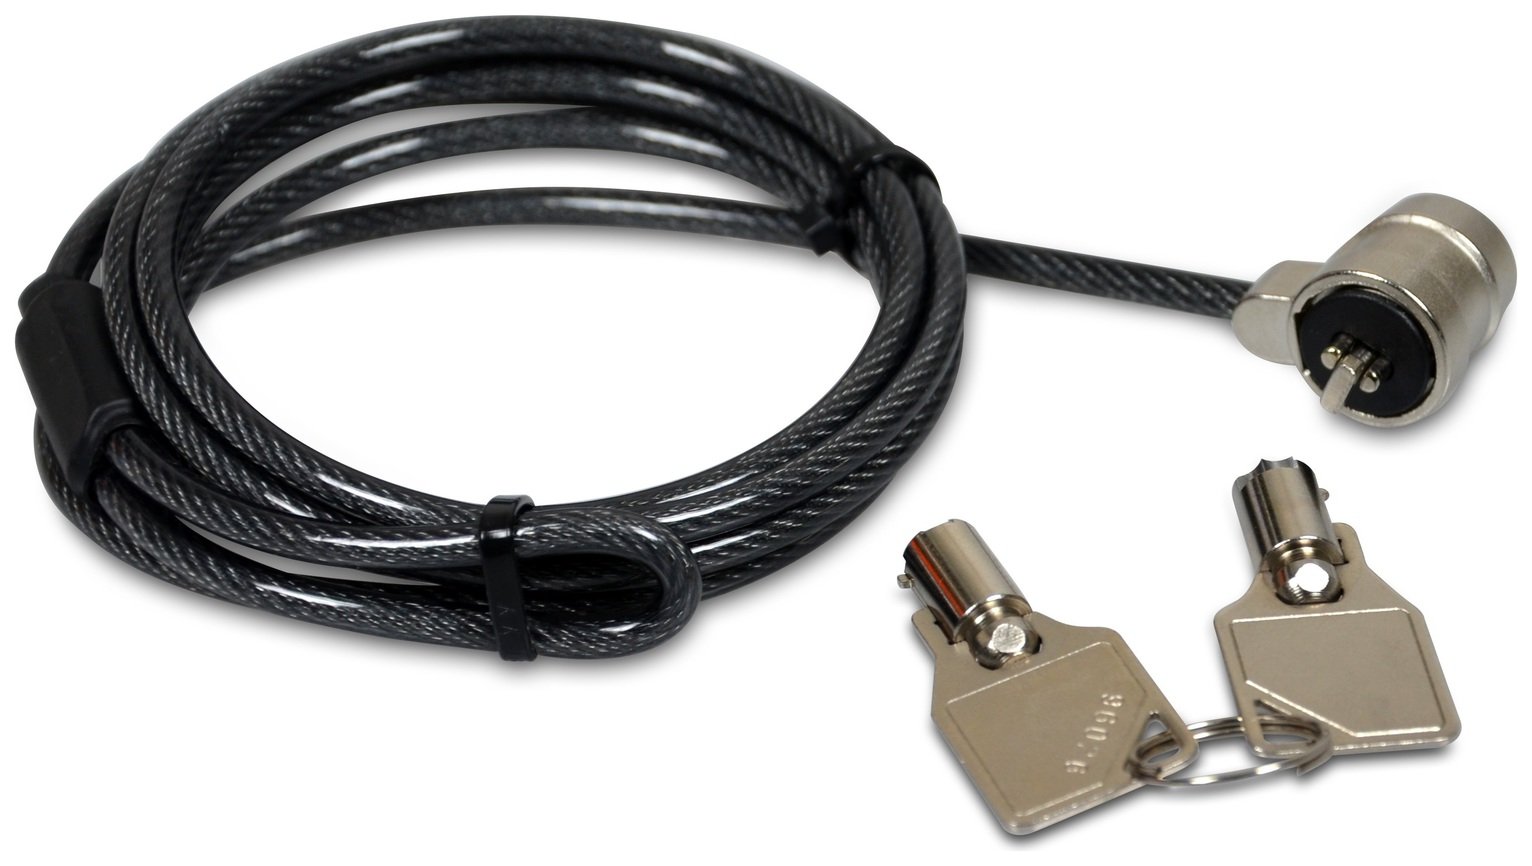 Port Connect Laptop Keyed Security Cable review